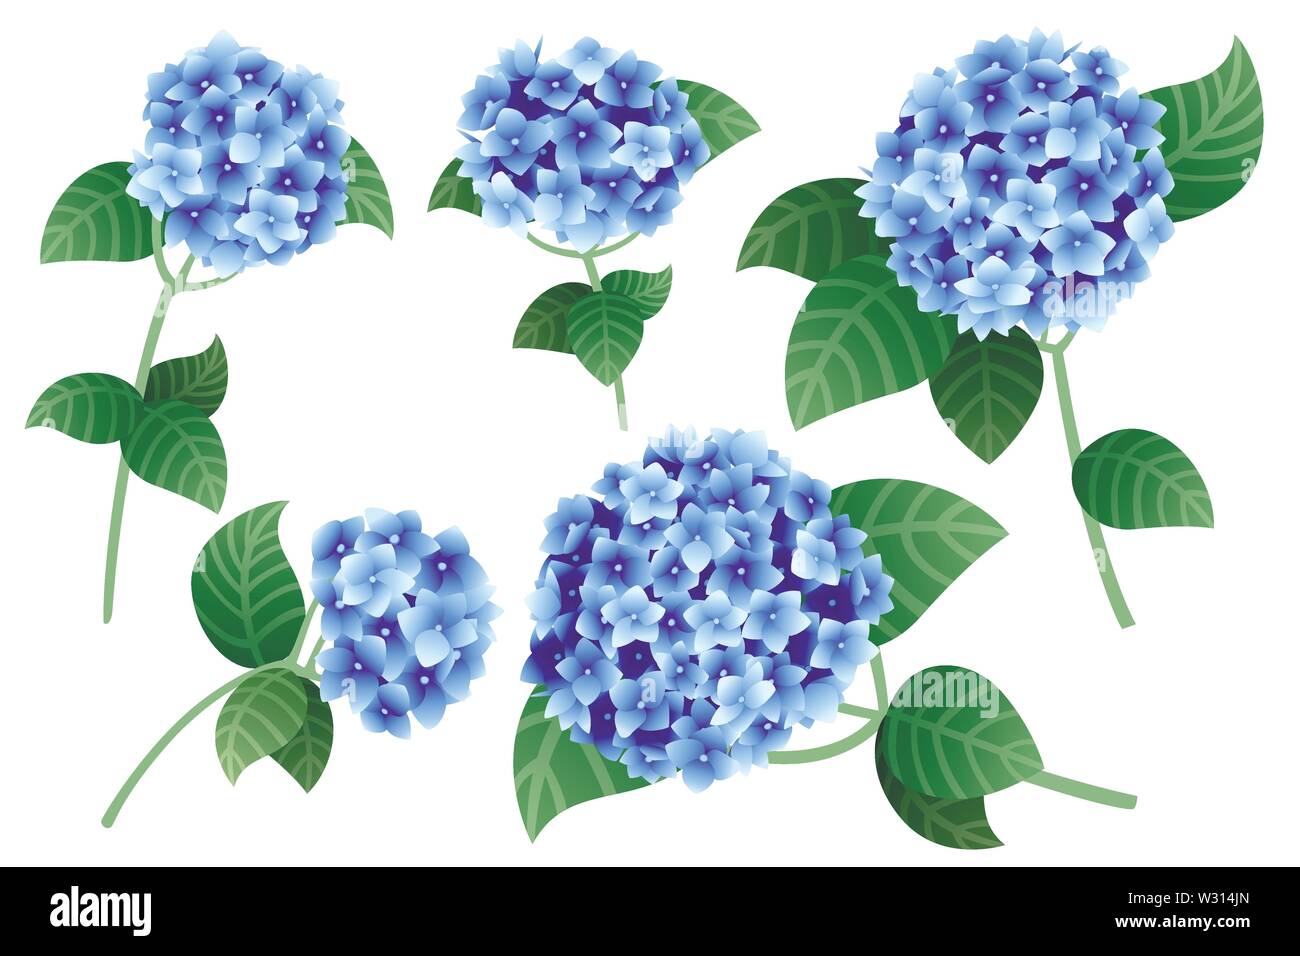 Set of blue hydrangea flowers with green stems and leaves flat vector illustration isolated on white background. Stock Vector